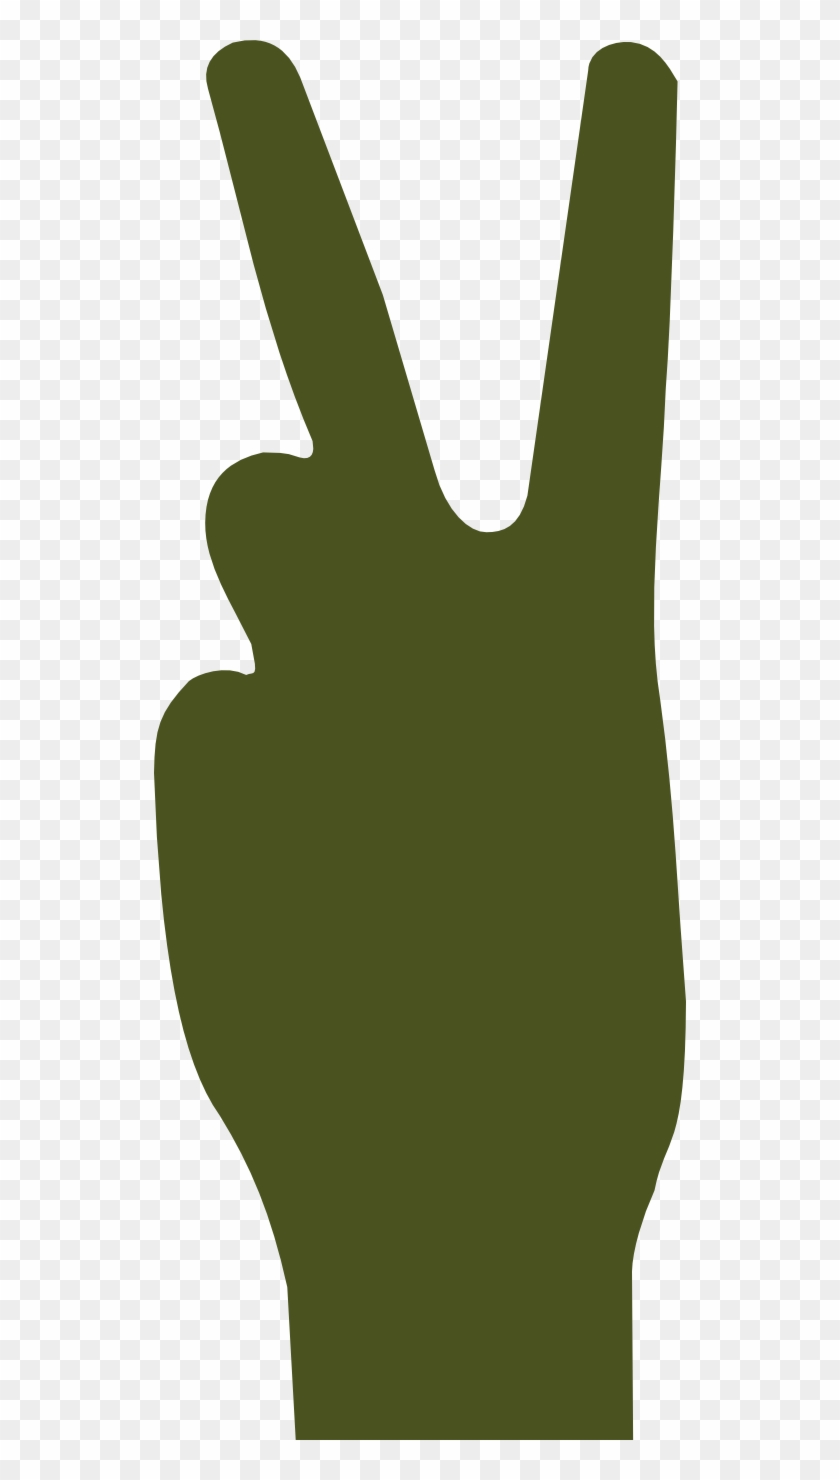 Army Green V Sign Peace Svg Scalable Vector Graphics Scalable Vector Graphics Full Size Png 